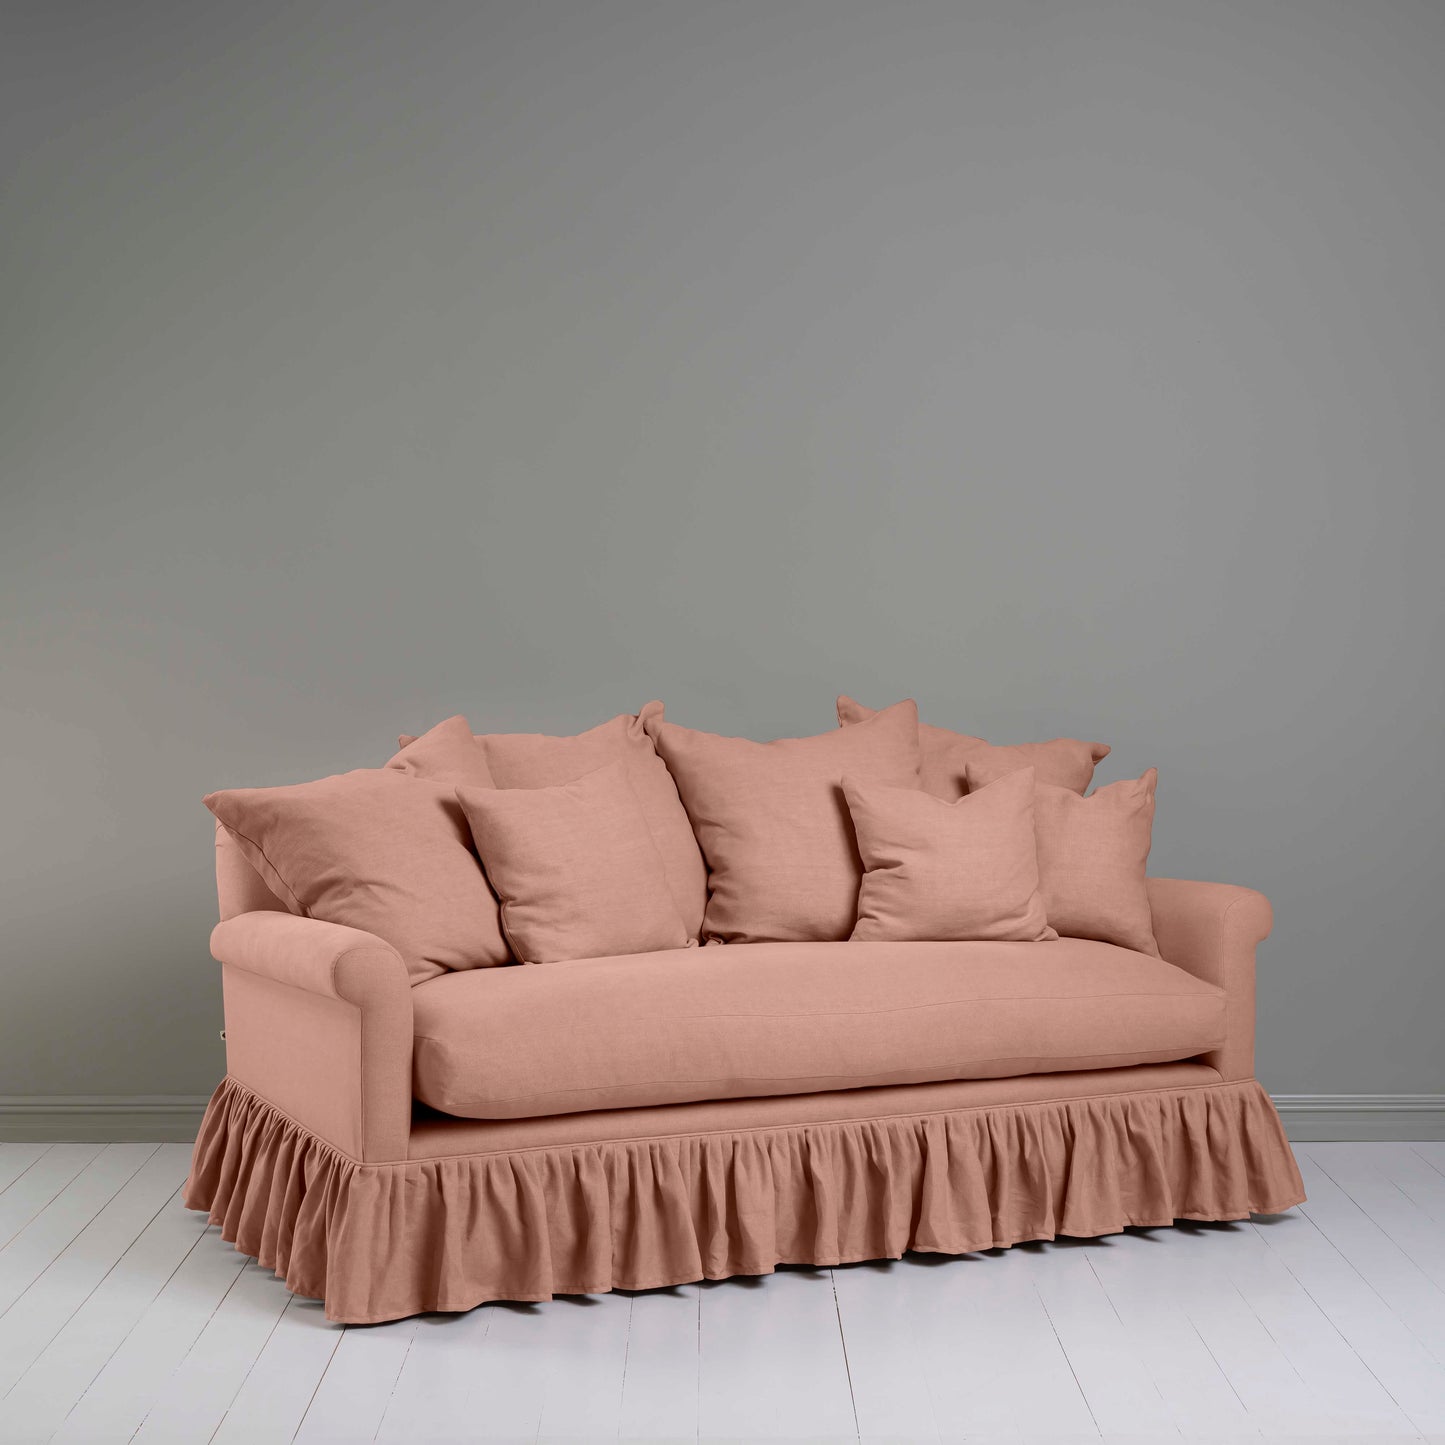 Curtain Call 3 Seater Sofa in Laidback Linen Roseberry